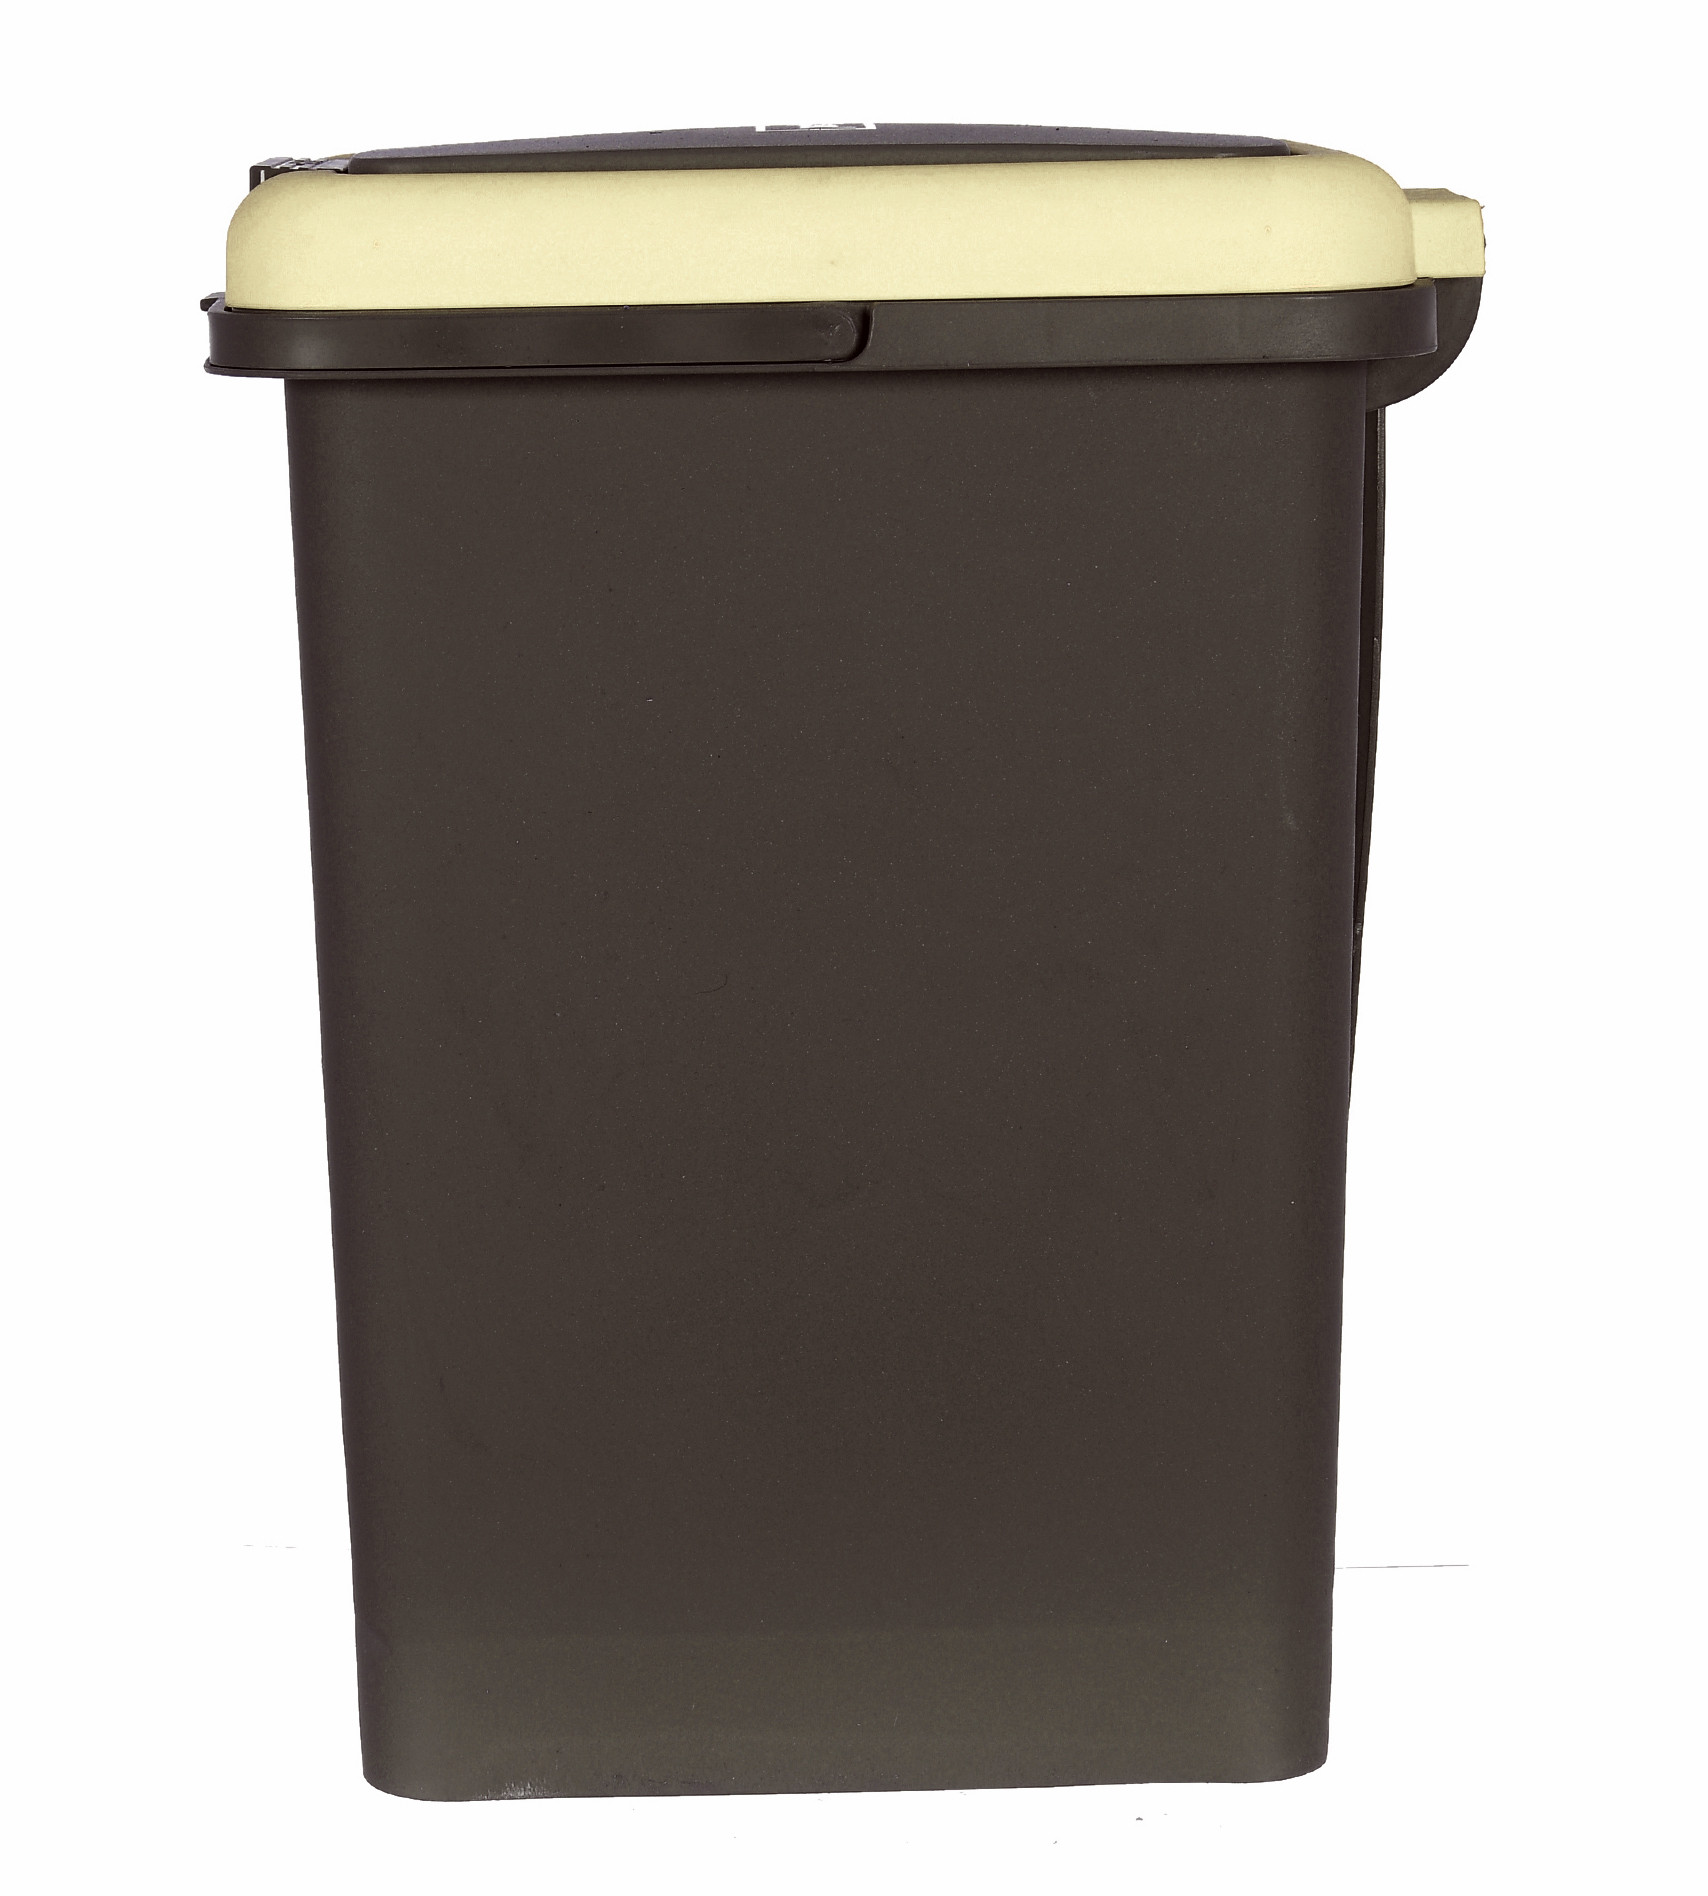 Kuber Industries Portable 10 Ltr Plastic Push And Pedal Dustbin With Lid & Handle Garbage Bins for Home Office (Black & Cream)